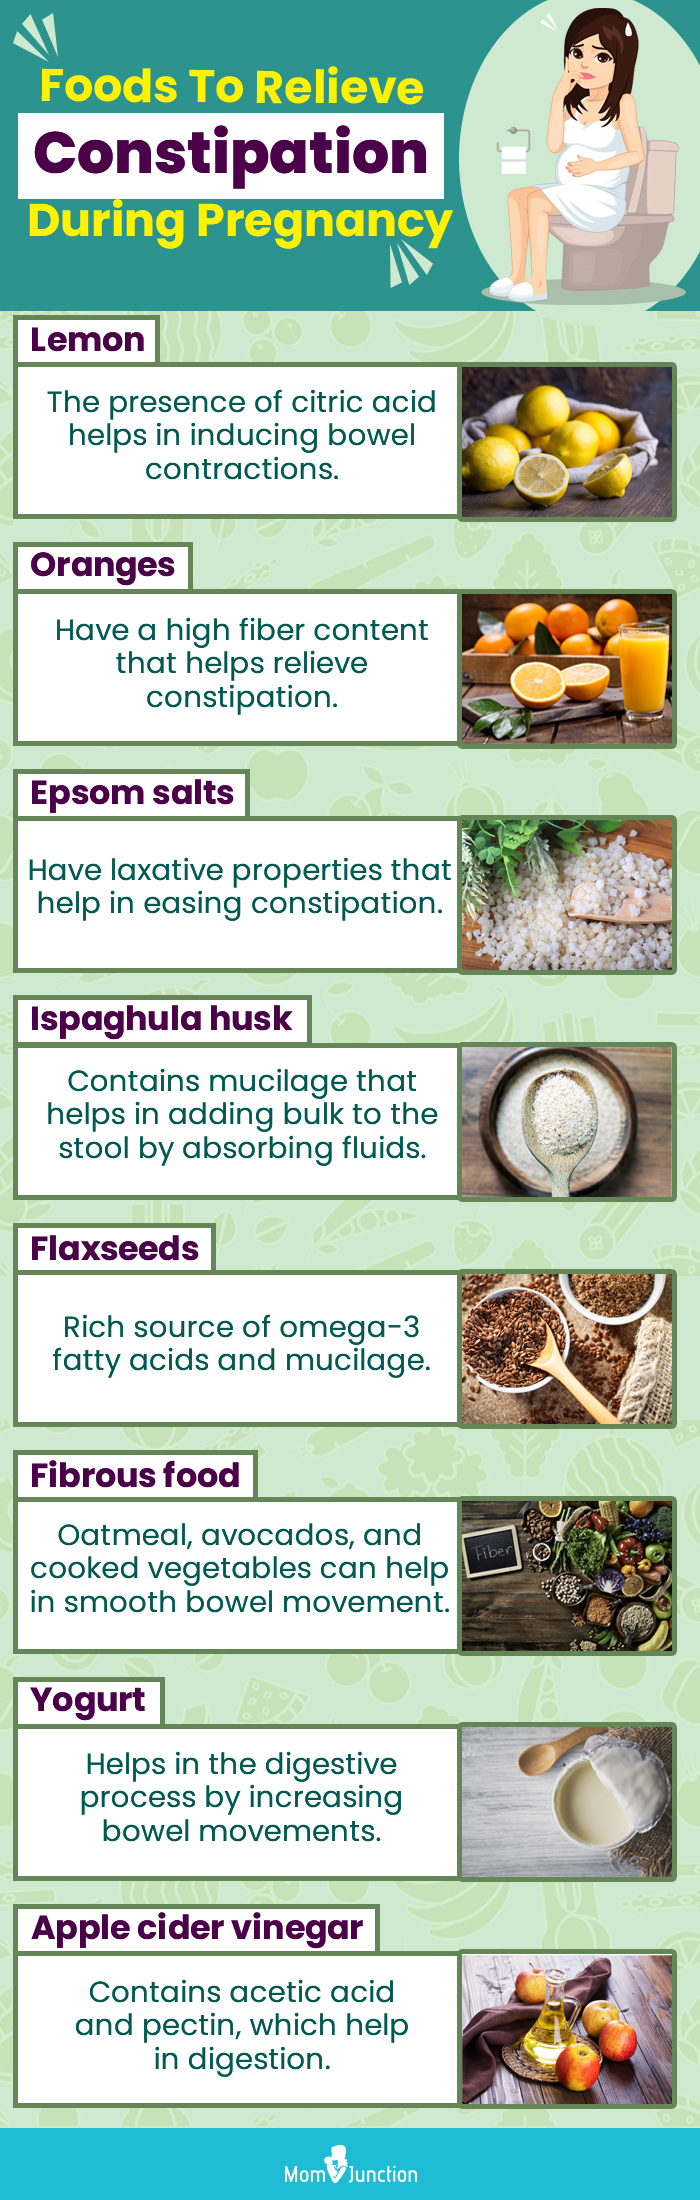 foods to relieve constipation during pregnancy [infographic]